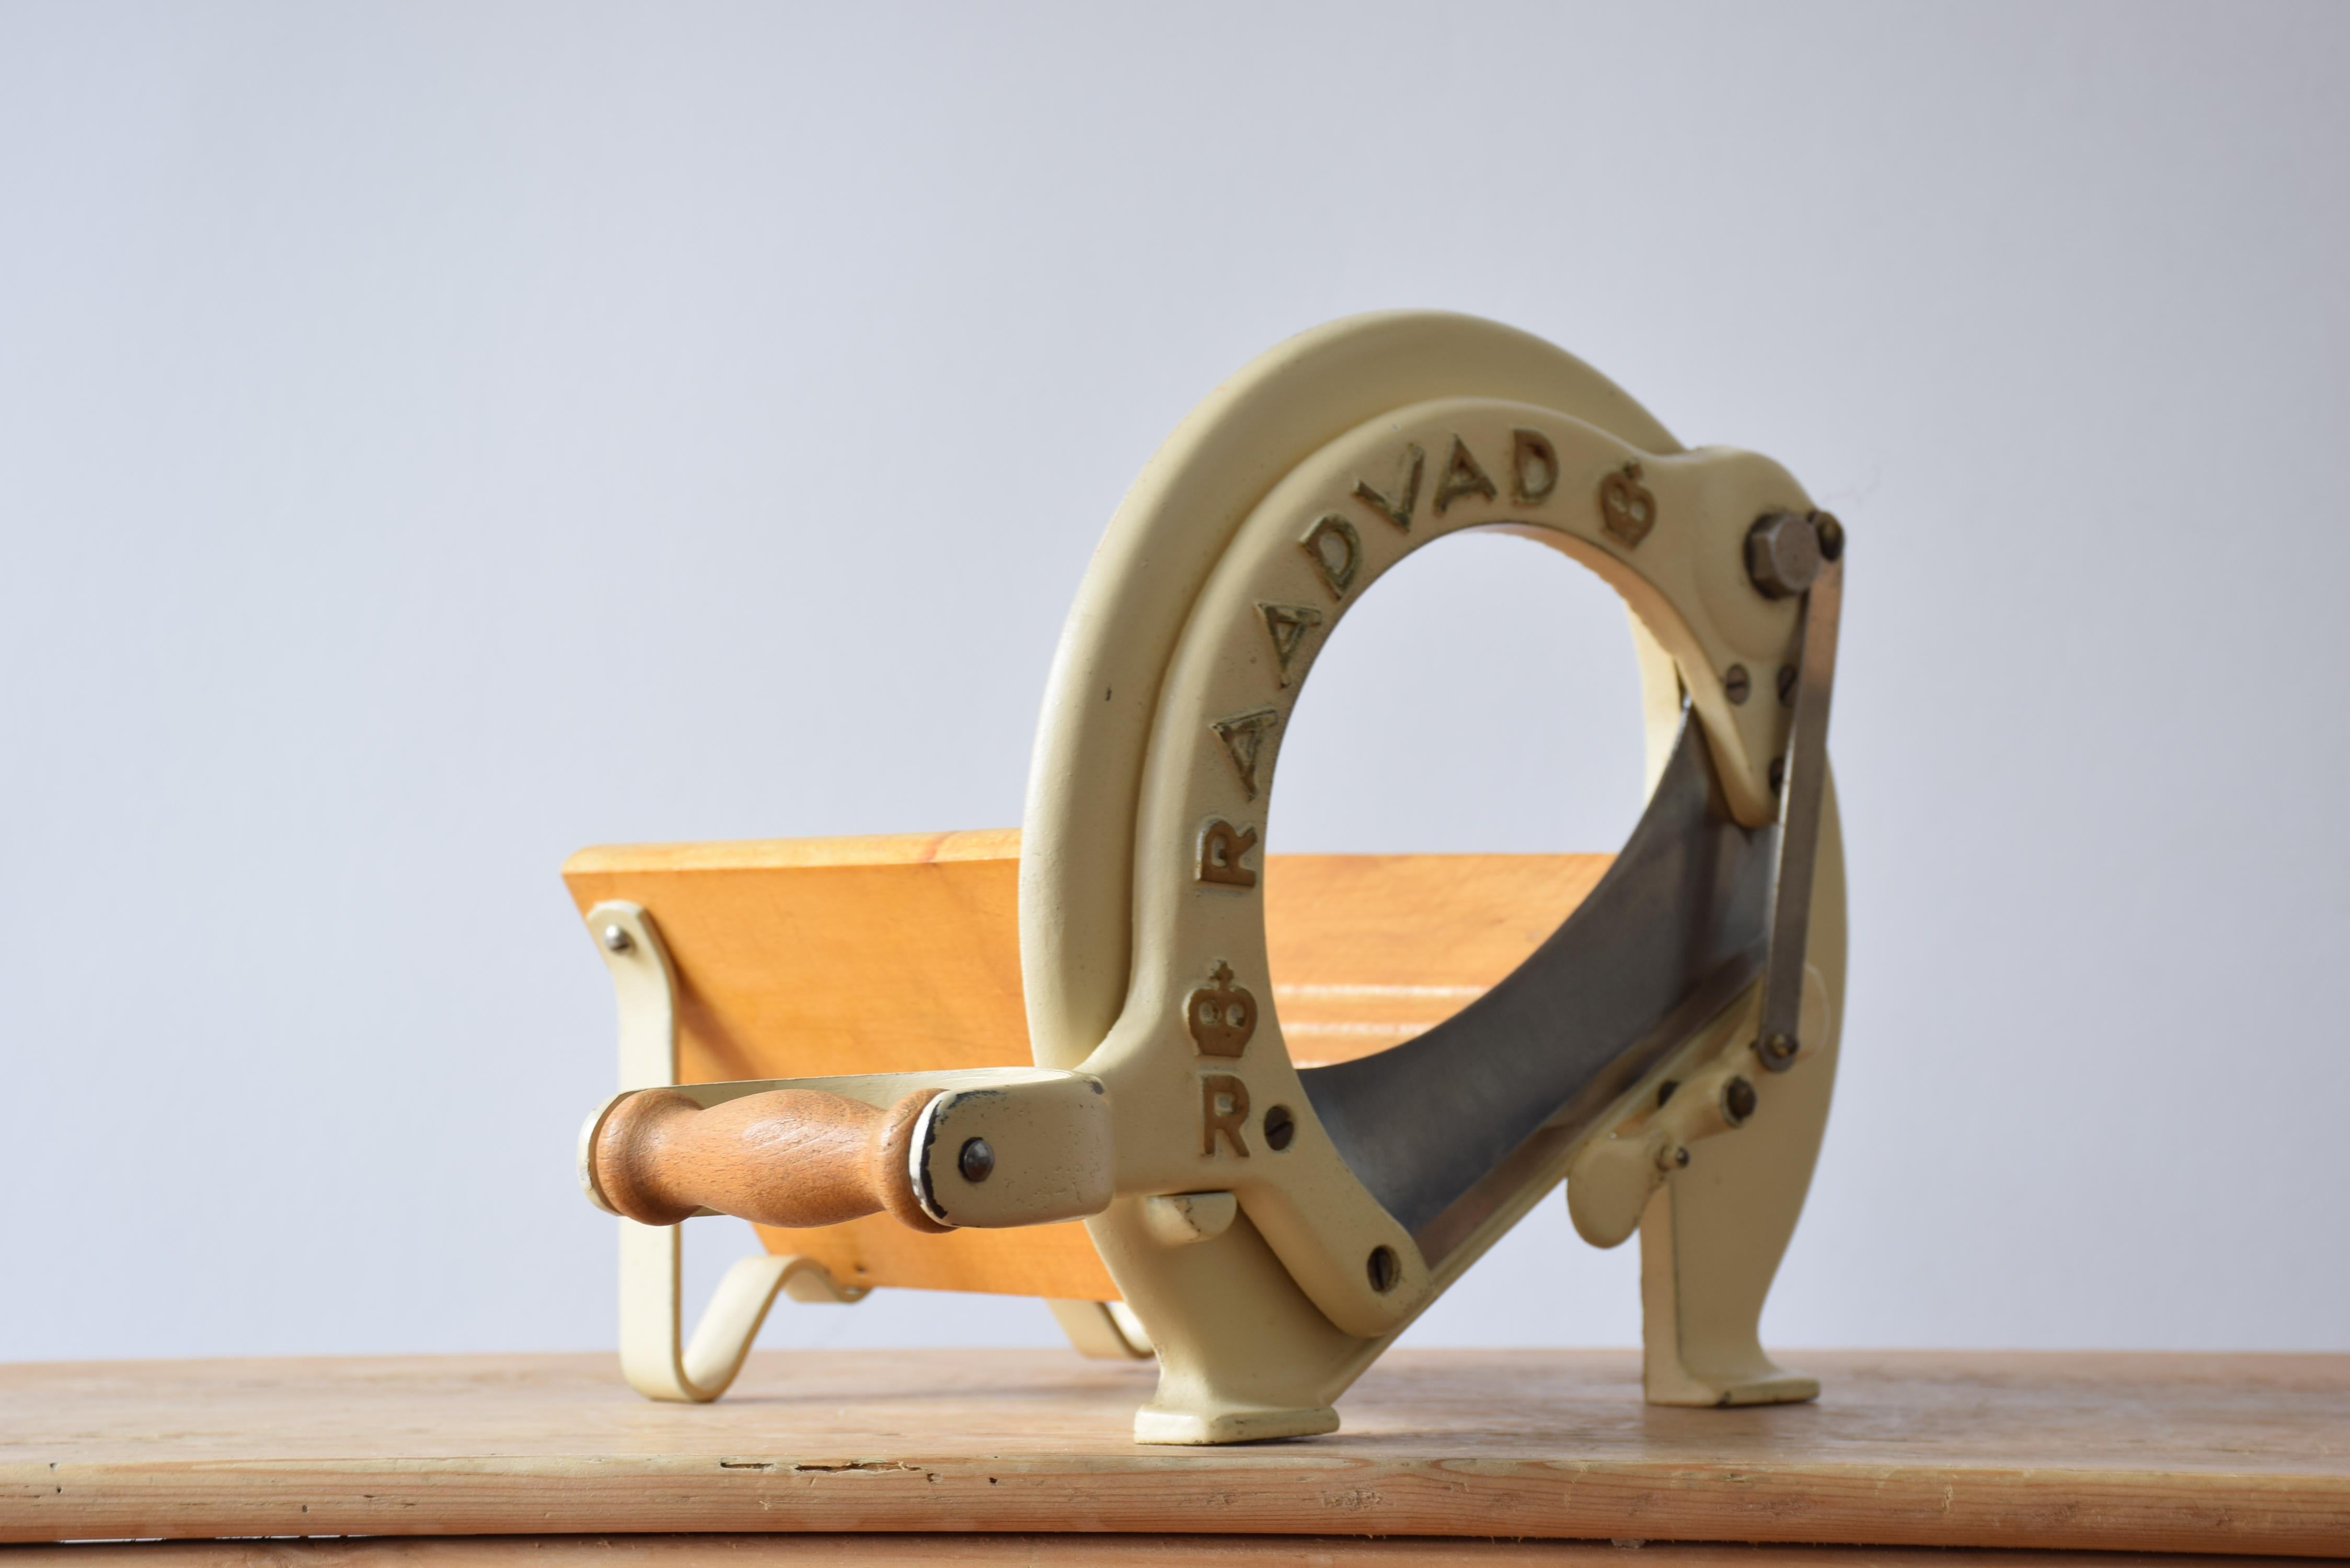 This iconic Danish bread slicer was produced by Raadvad in Denmark circa 1940s-1960s and designed in the 1930s. It comes with original beige lacquer and original golden letters. The bread slicer is fully functional for slicing bread, especially